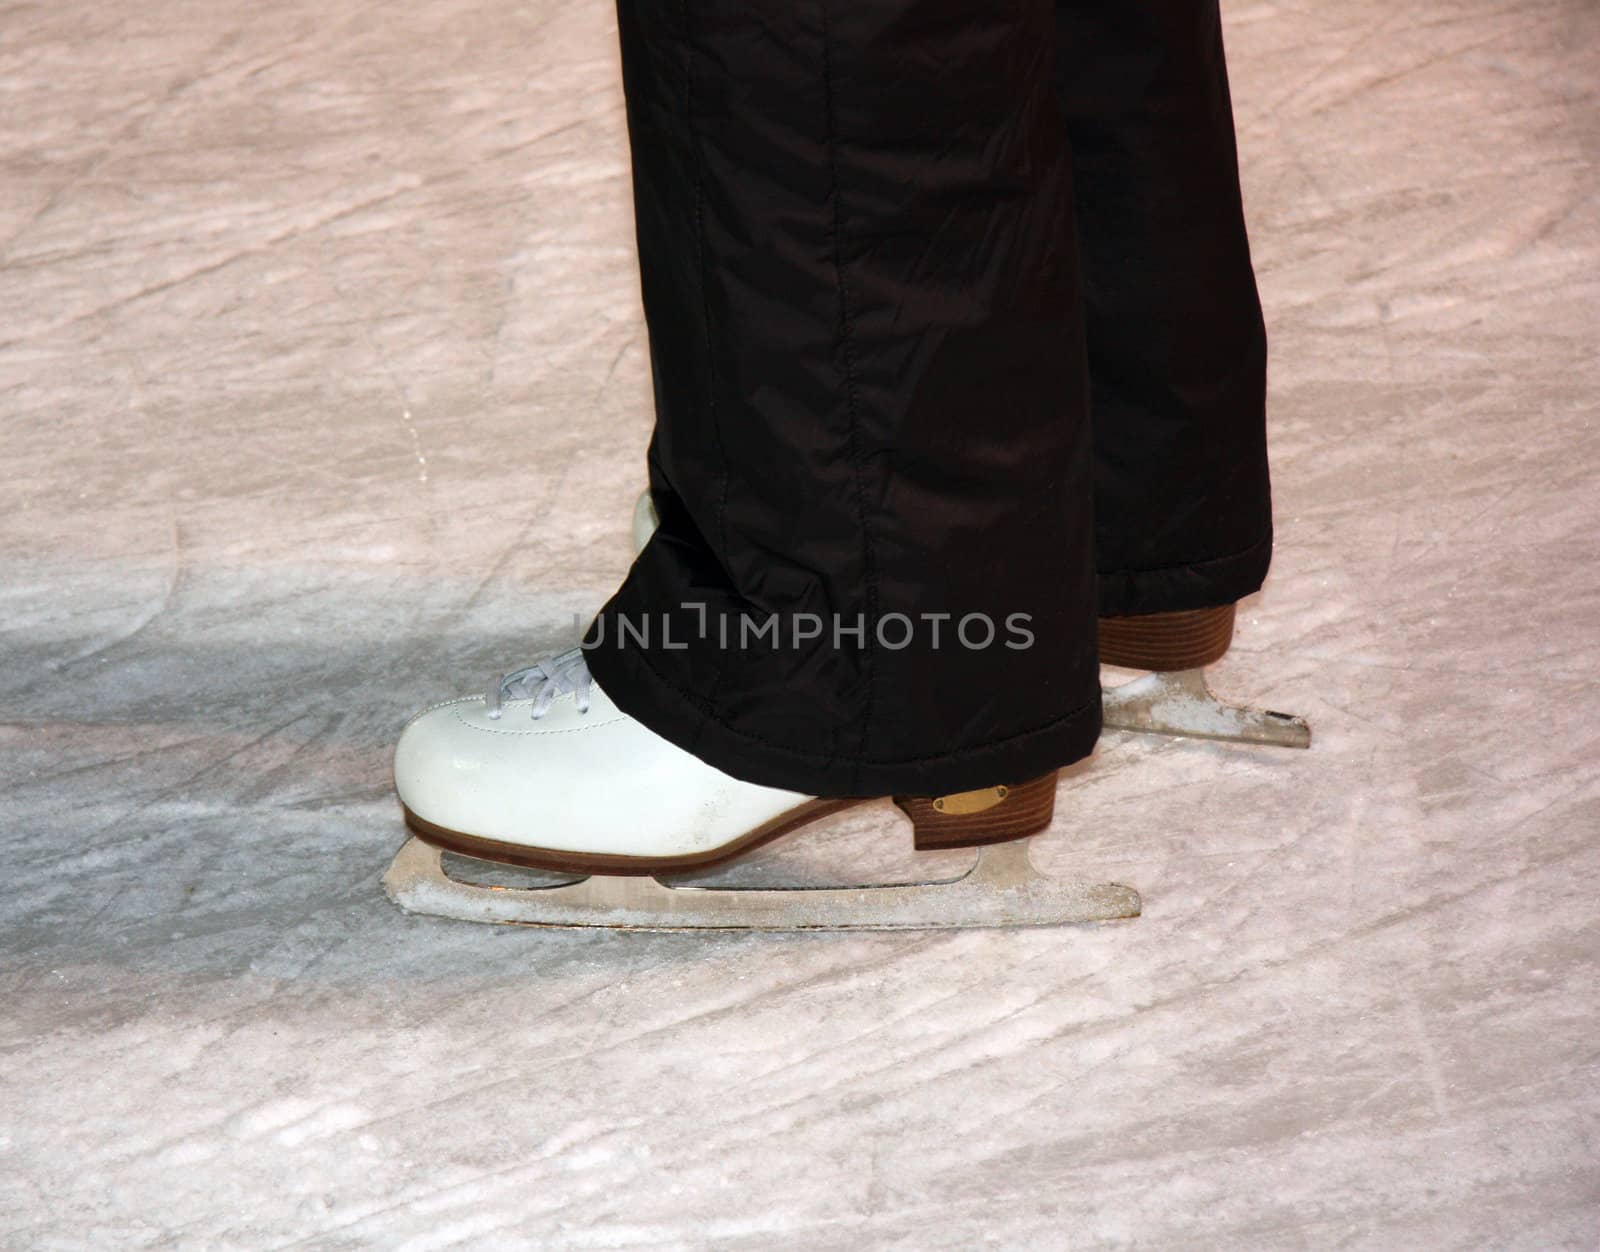 Pair of ice skates standing on the rink